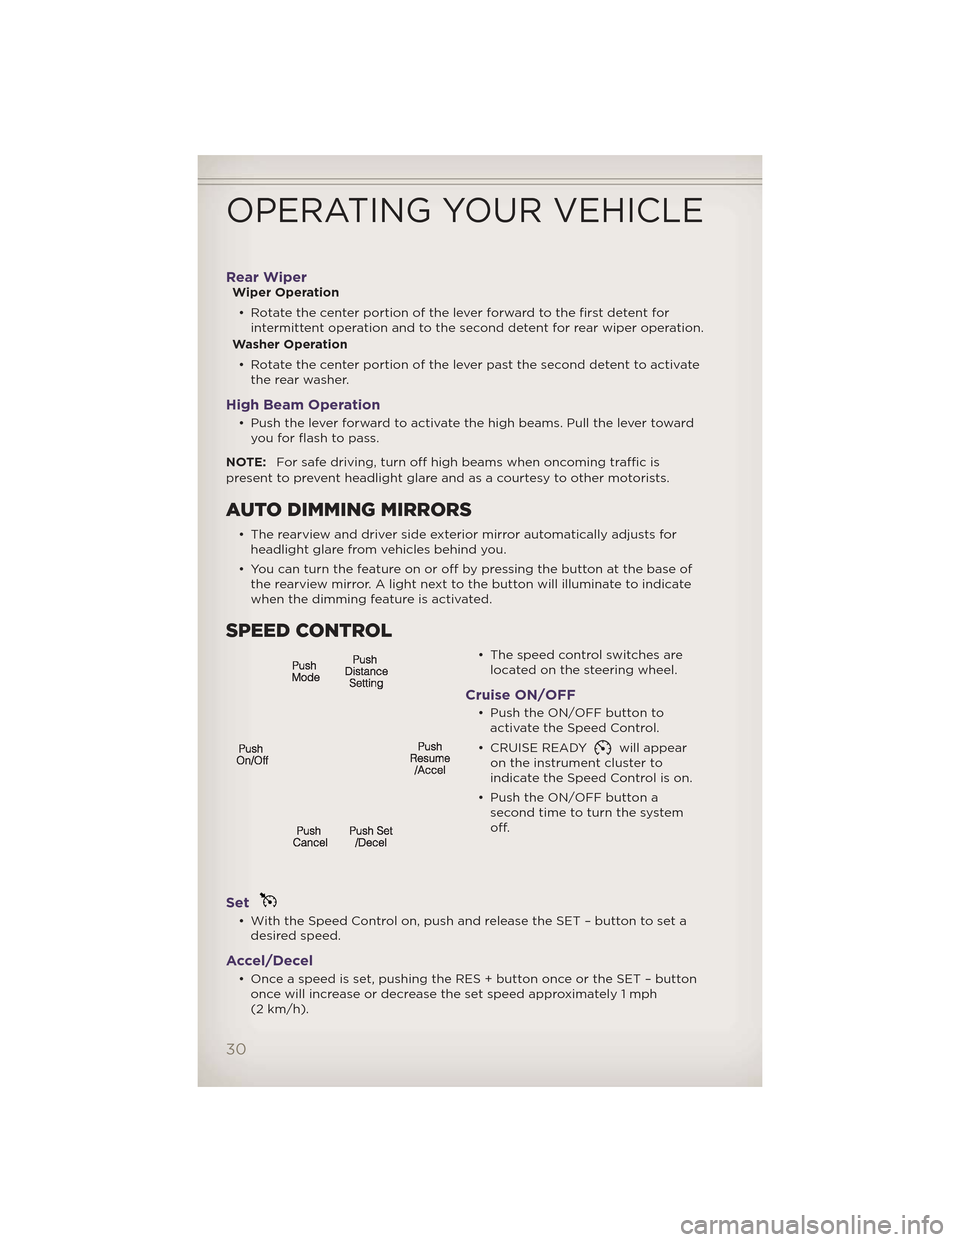 JEEP GRAND CHEROKEE 2012 WK2 / 4.G Owners Guide Rear WiperWiper Operation• Rotate the center portion of the lever forward to the first detent for intermittent operation and to the second detent for rear wiper operation.
Washer Operation
• Rotat